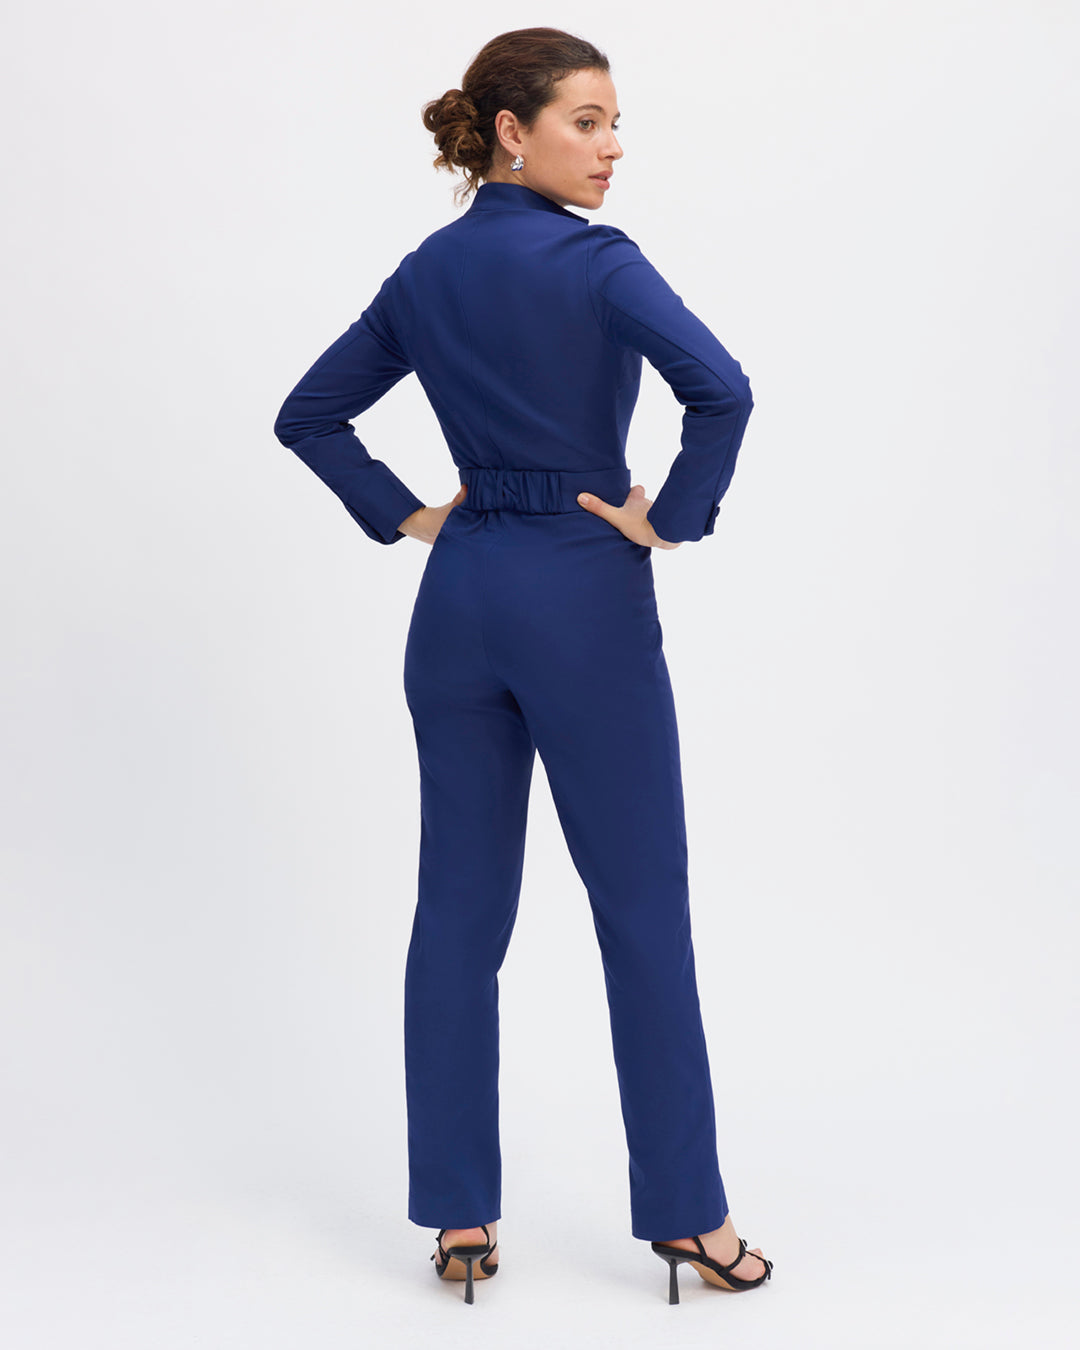 Electric-blue-suit-Removable-belt-tone-on-tone-with-buckle-V-neck-two-buttons-tone-on-tone-at-wrist-four-breasted-pockets-17H10-suit-for-women-paris-